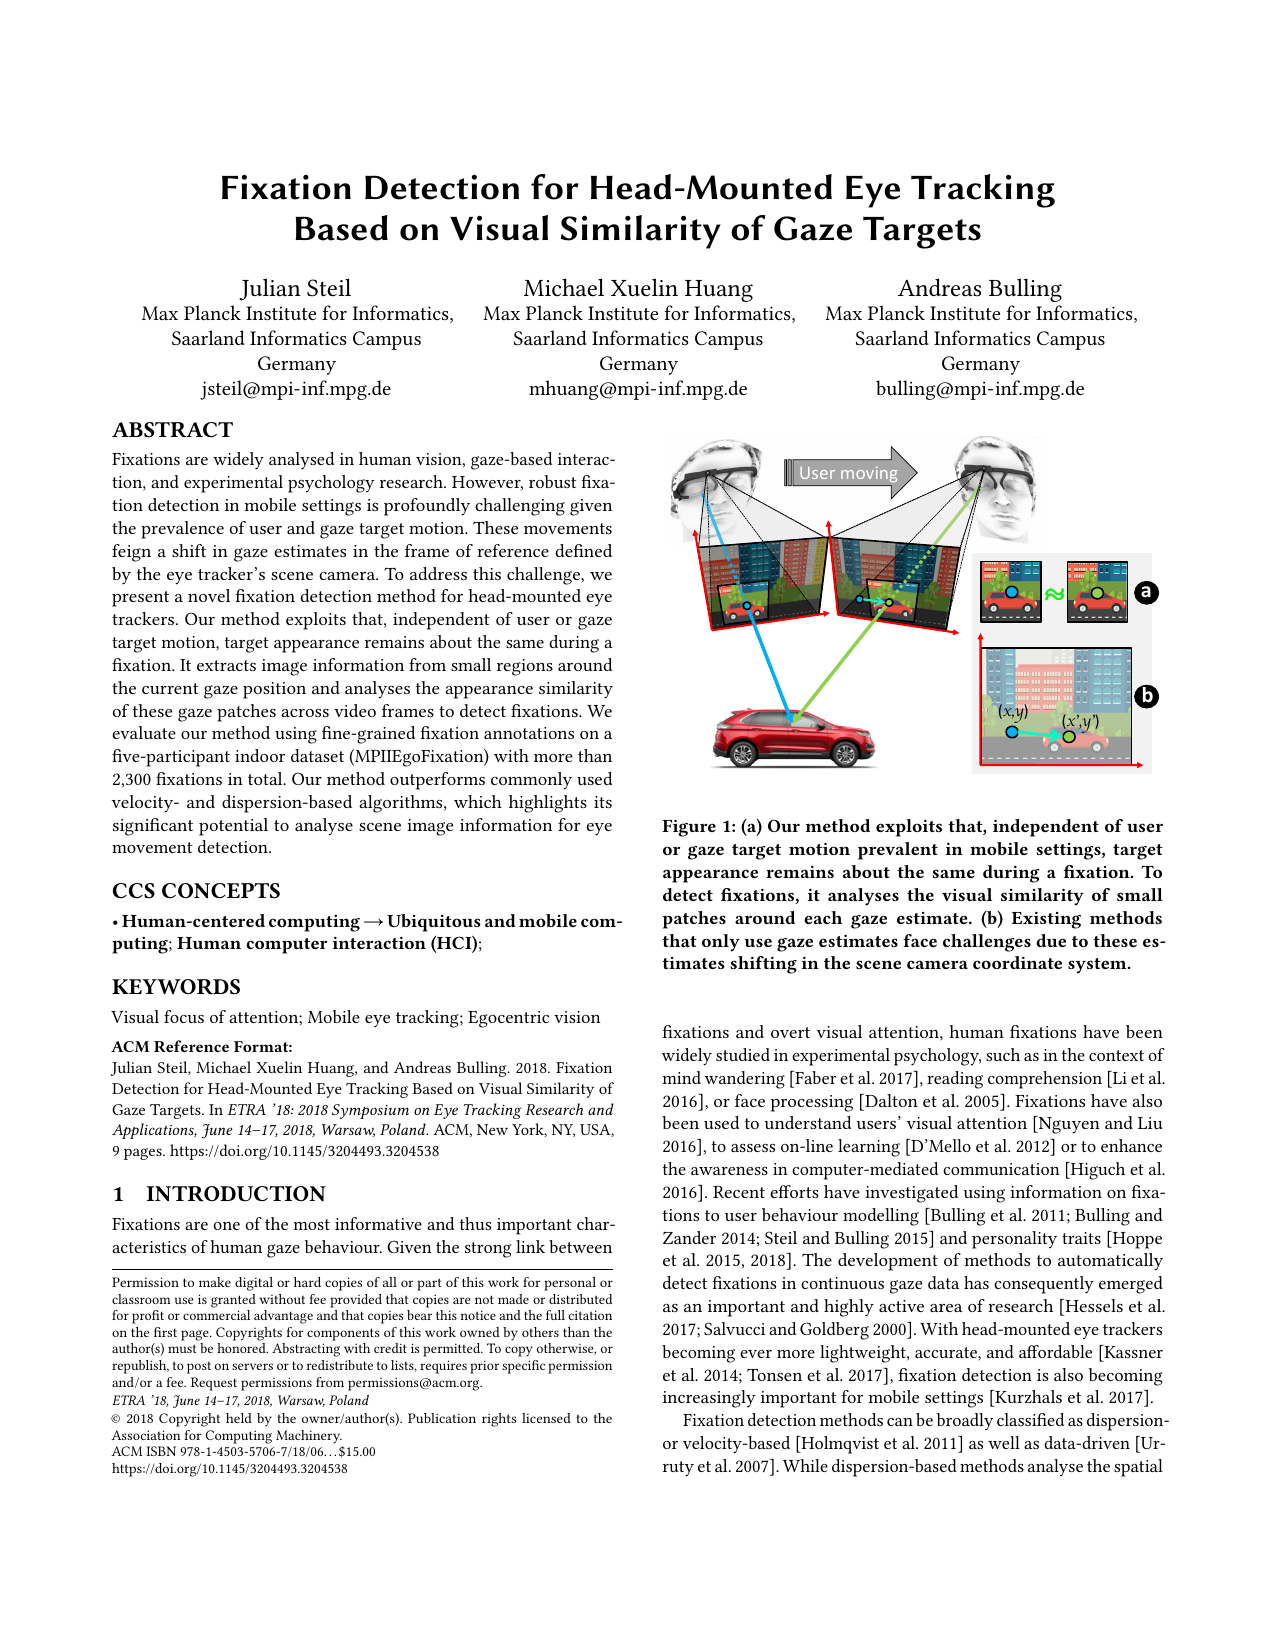 Fixation Detection for Head-Mounted Eye Tracking Based on Visual Similarity of Gaze Targets